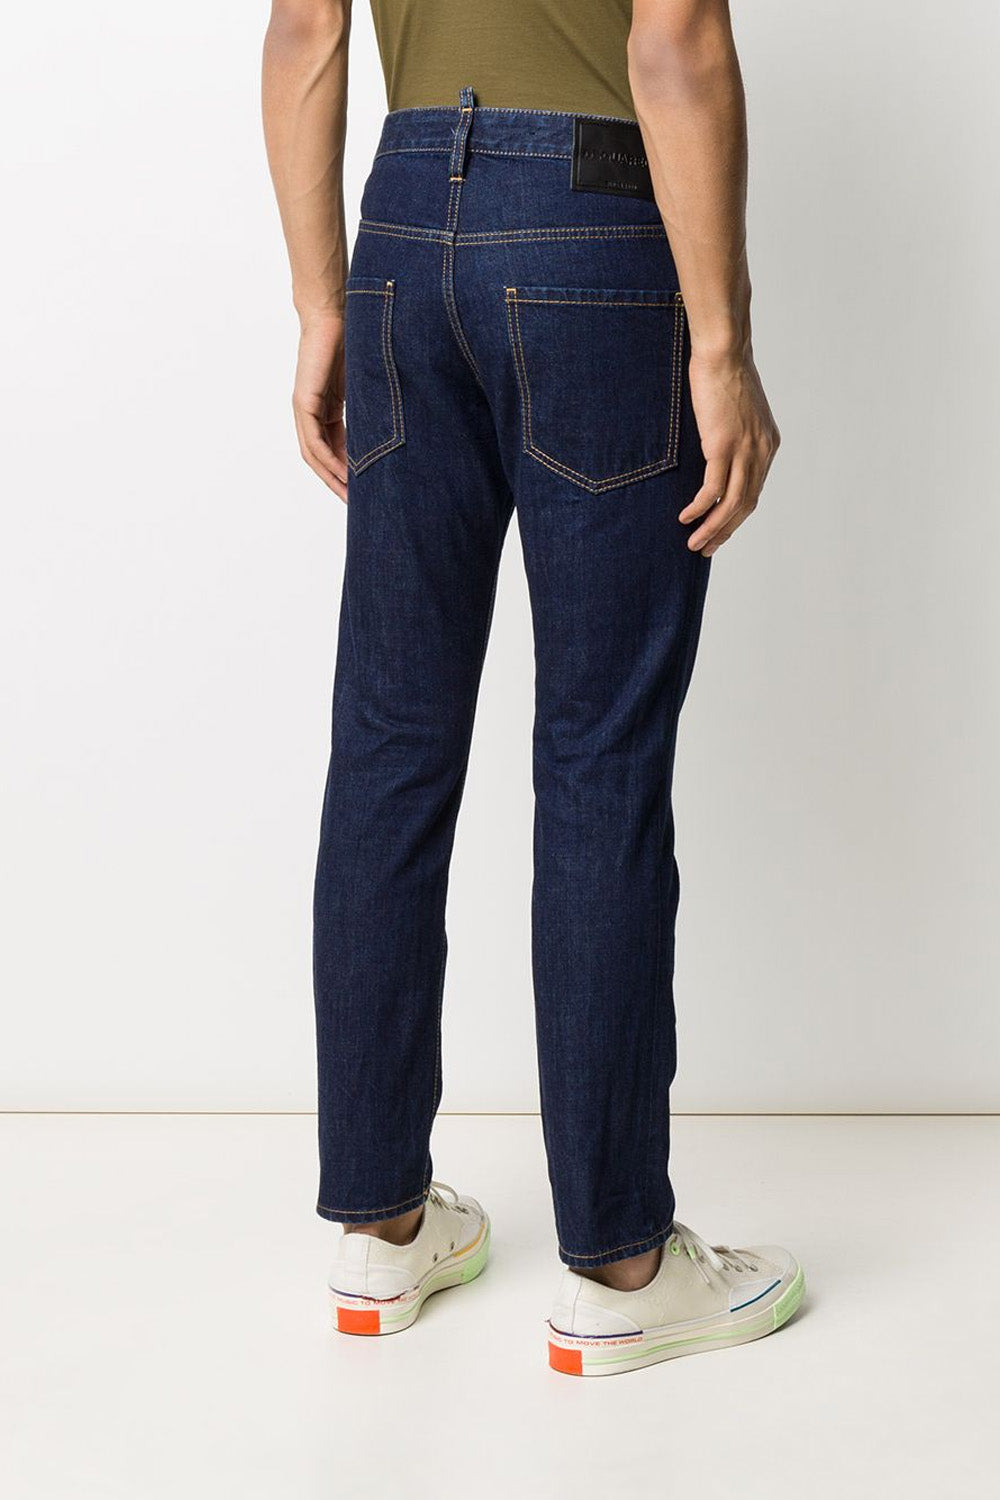 Dsquared2 high-rise straight leg jeans